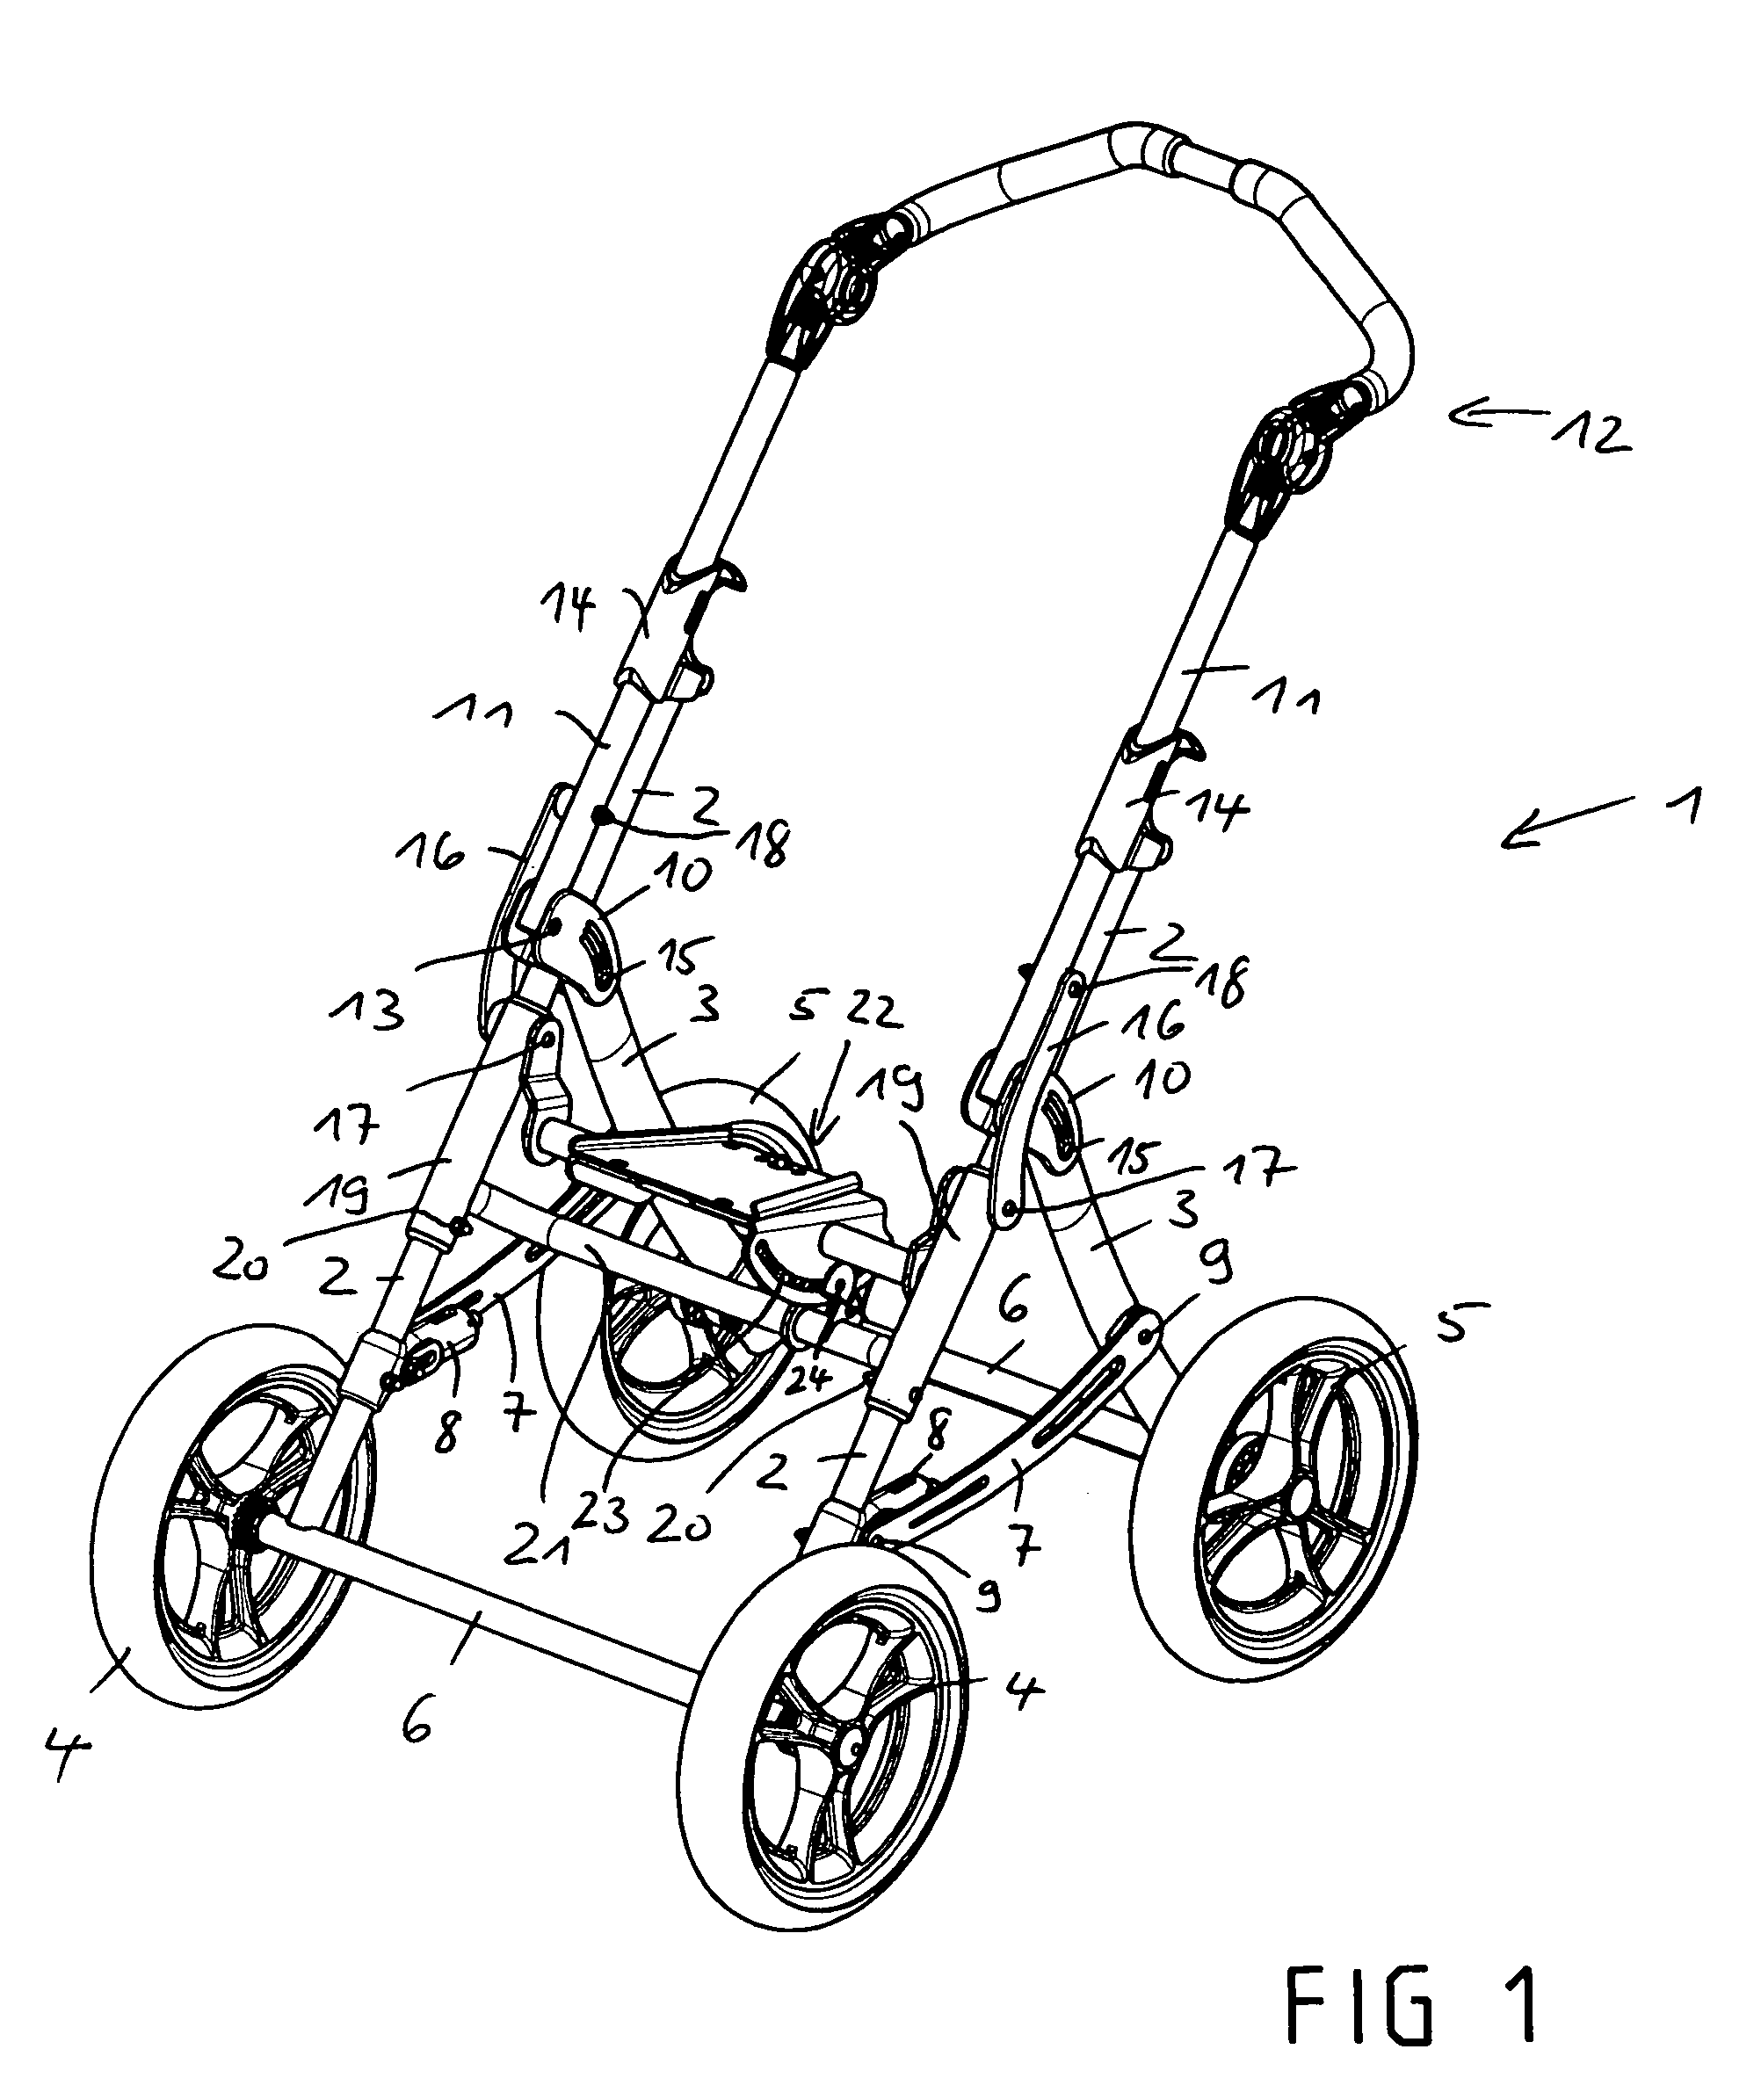 Collapsible stroller for children and the like